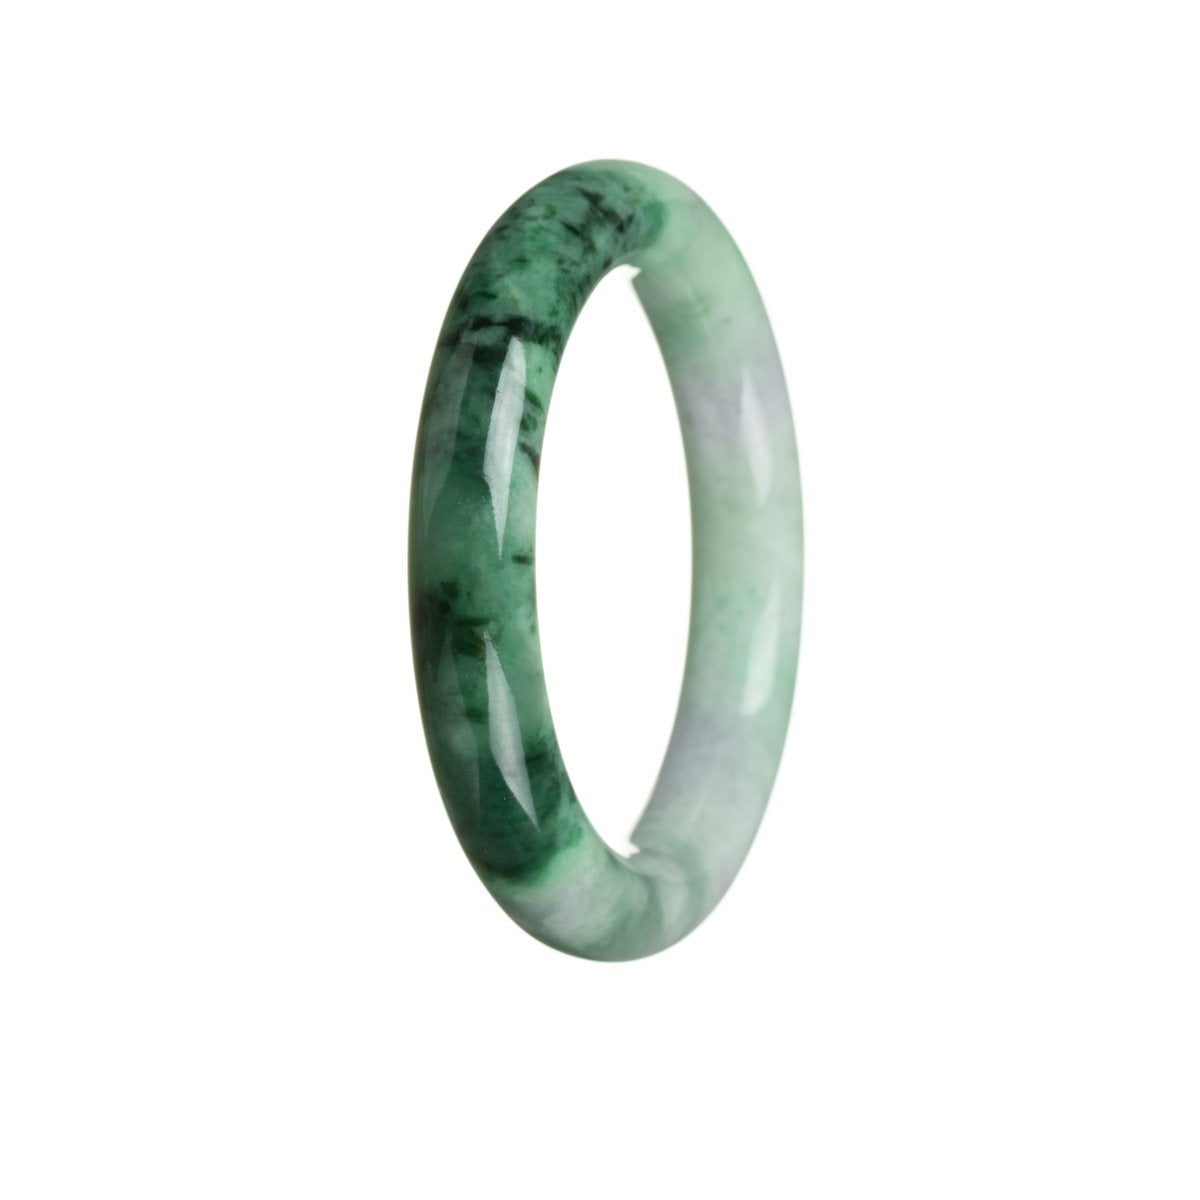 A round, traditional jade bangle bracelet with a certified Grade A green color and a beautiful pattern.